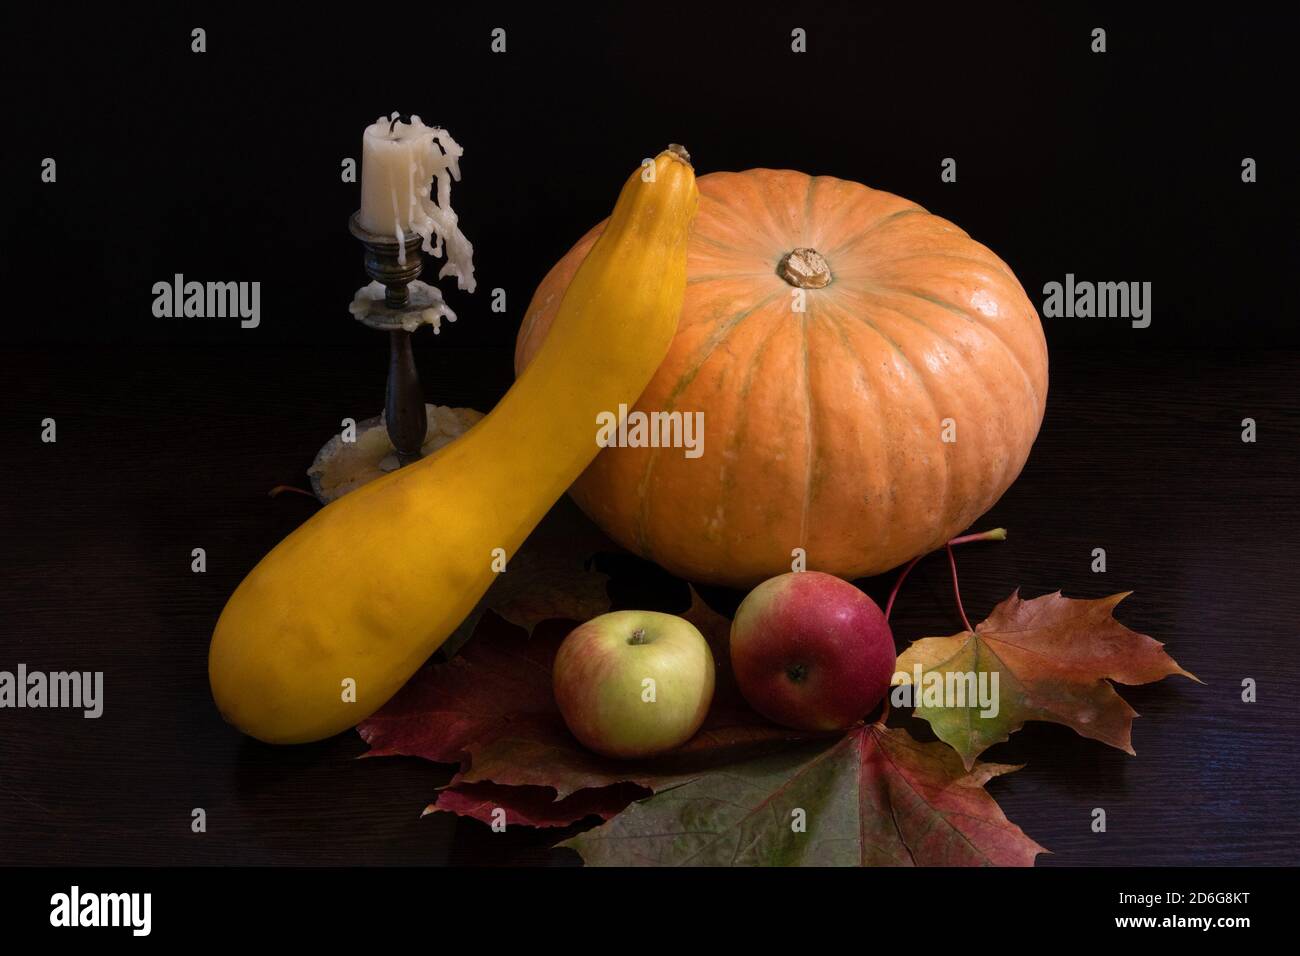 Autumn still life with big pumpkin, squash, apples and extinguished candle in bronze candlestick on the falling maple leaves Stock Photo